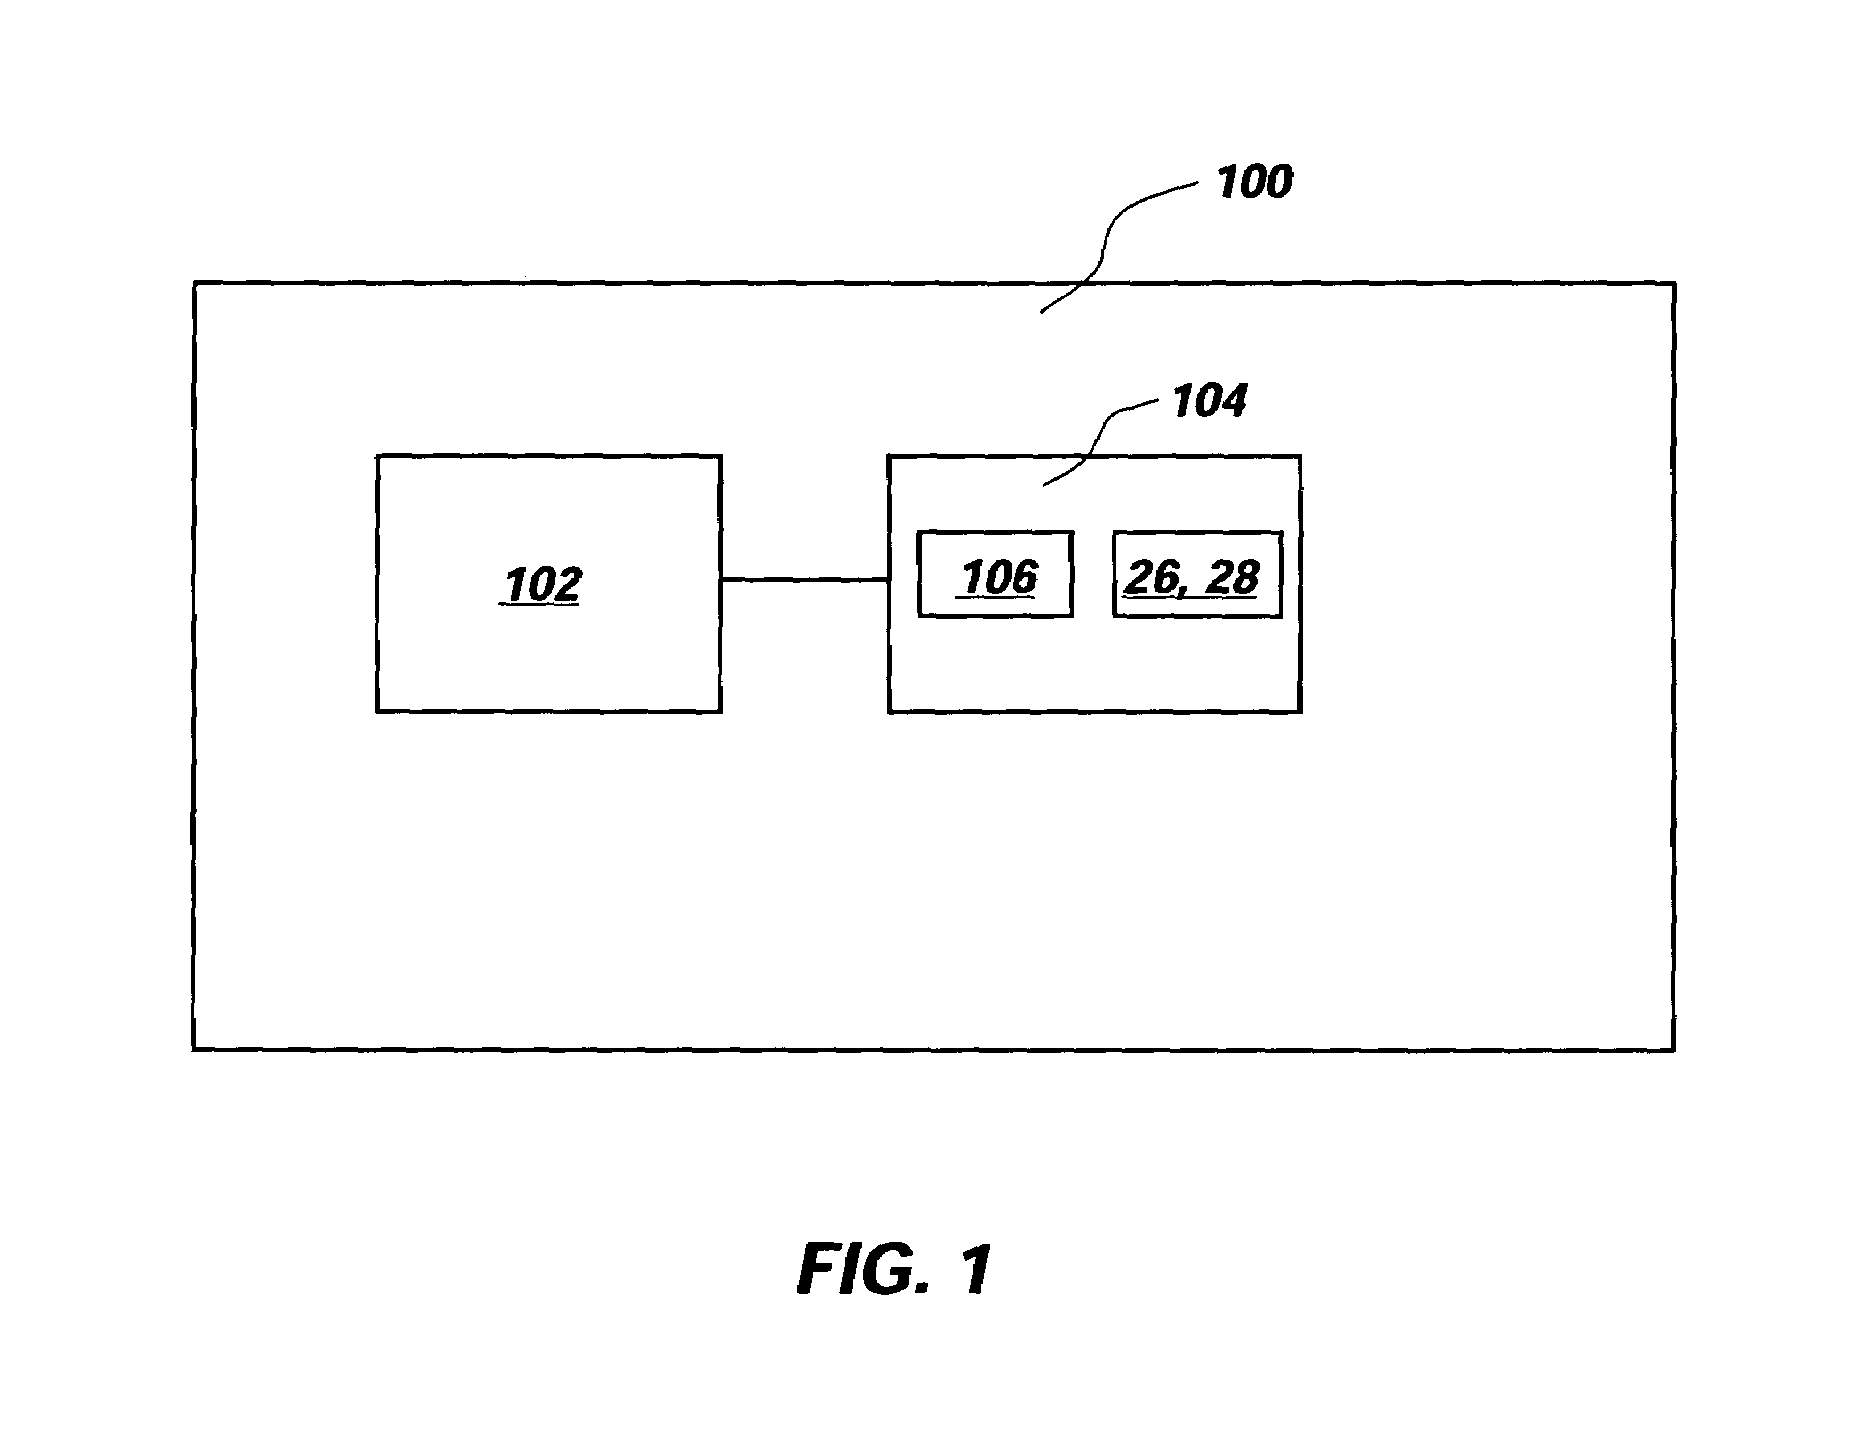 Lift-out probe having an extension tip, methods of making and using, and analytical instruments employing same